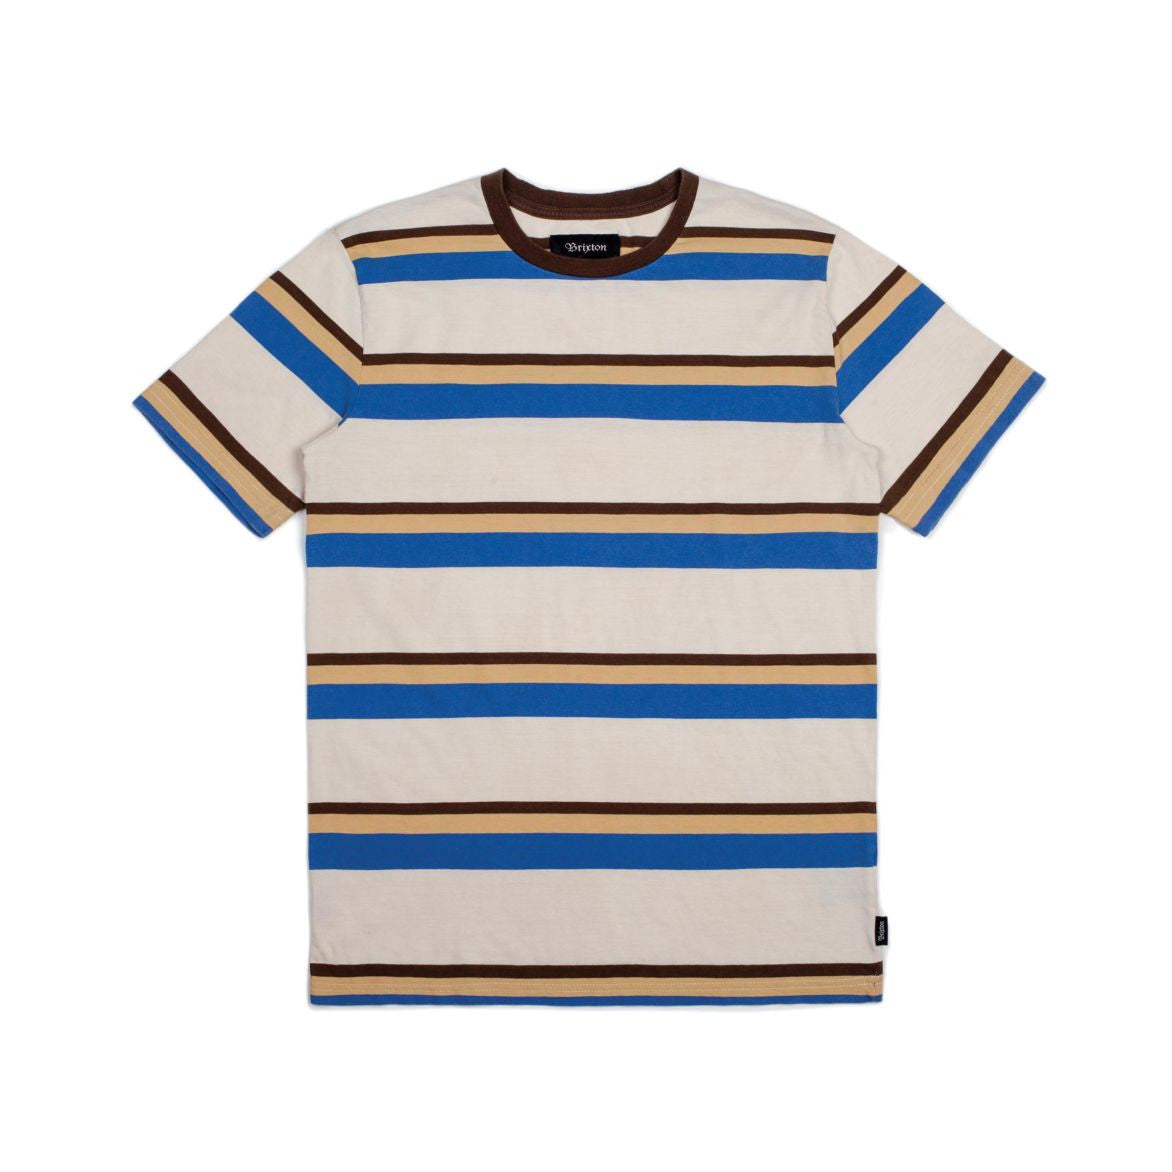 Brixton - Clive Men's S/S Knit Tee, Off White - The Giant Peach